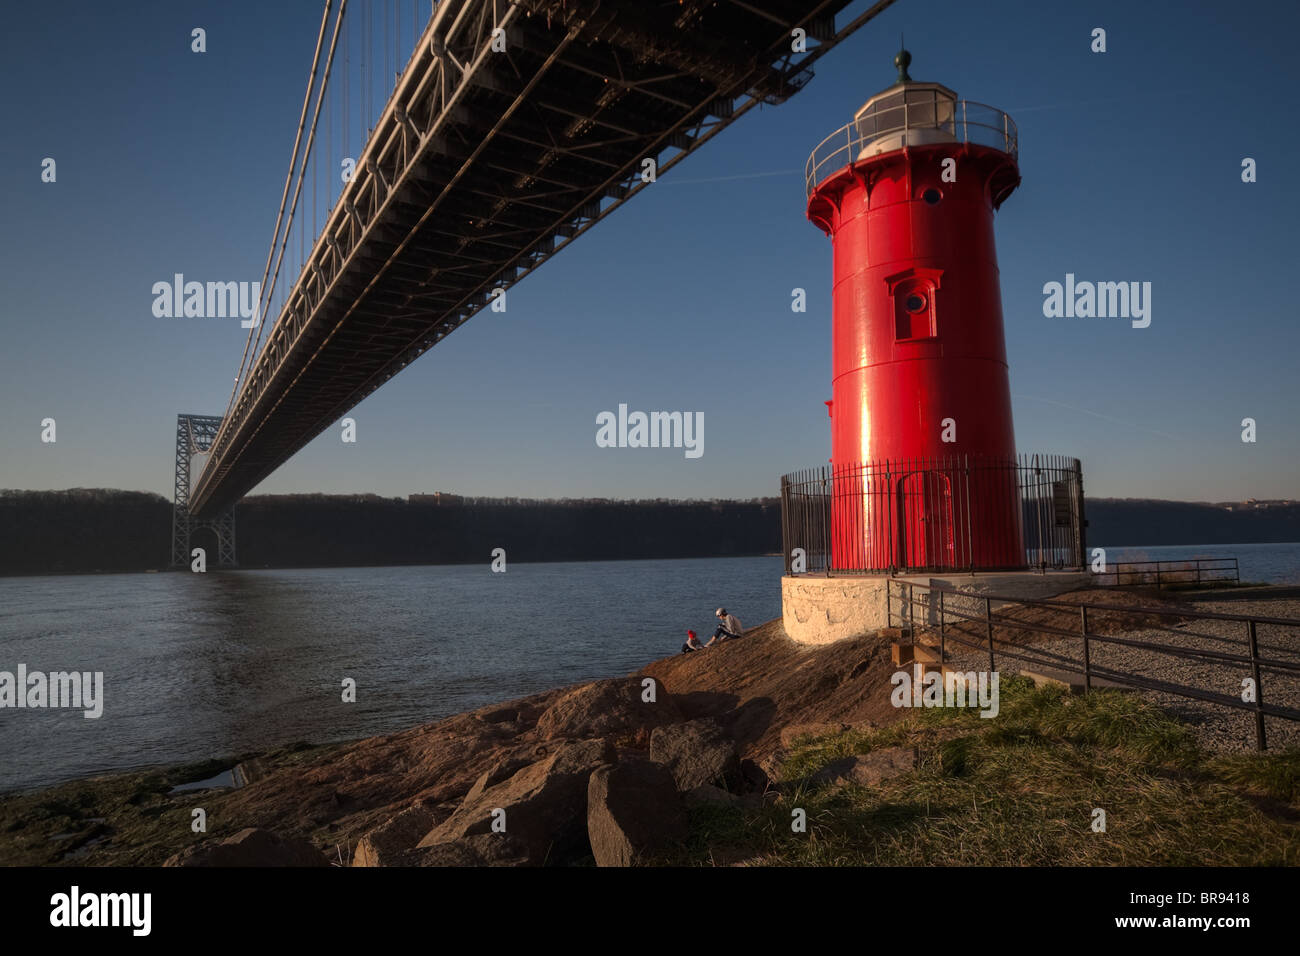 A Father and Son Sit Next to the Little Red Lighthouse Under the George Washington Bridge at Sunset Stock Photo